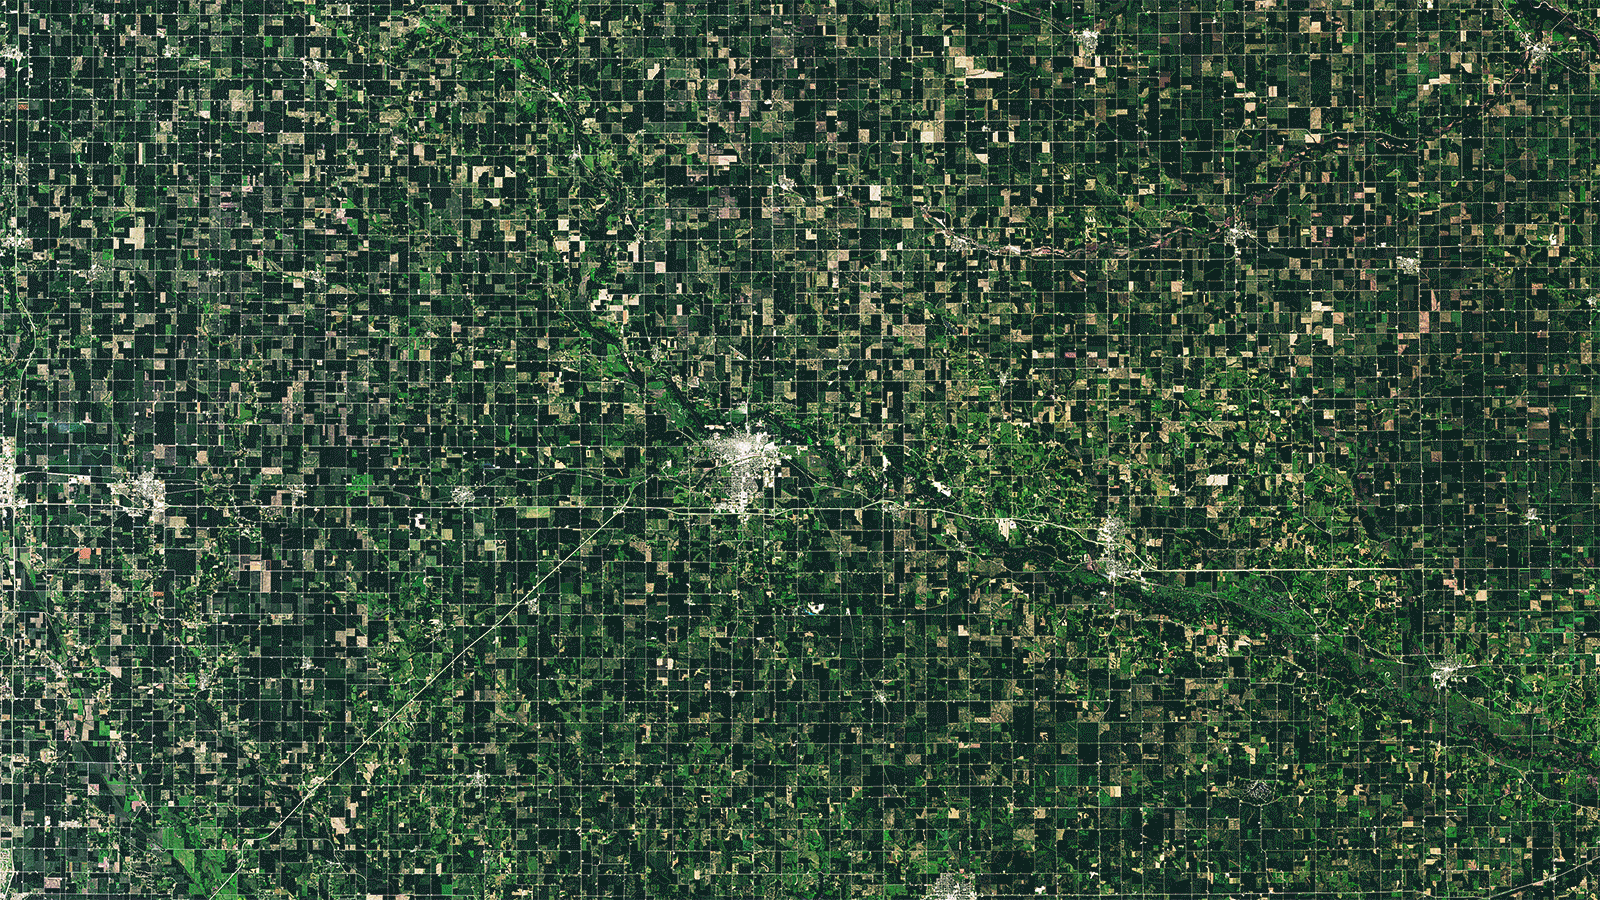 Before and after images from the Iowa derecho show the extent of damage to cornfields. The darker green image is from July 10. The lighter image is from Aug. 11 after the derecho passed through. Wind-damaged crops show up as a lighter green while darker areas in the after image could be areas where less damage took place or where tree breaks stand. (Gif: NASA)